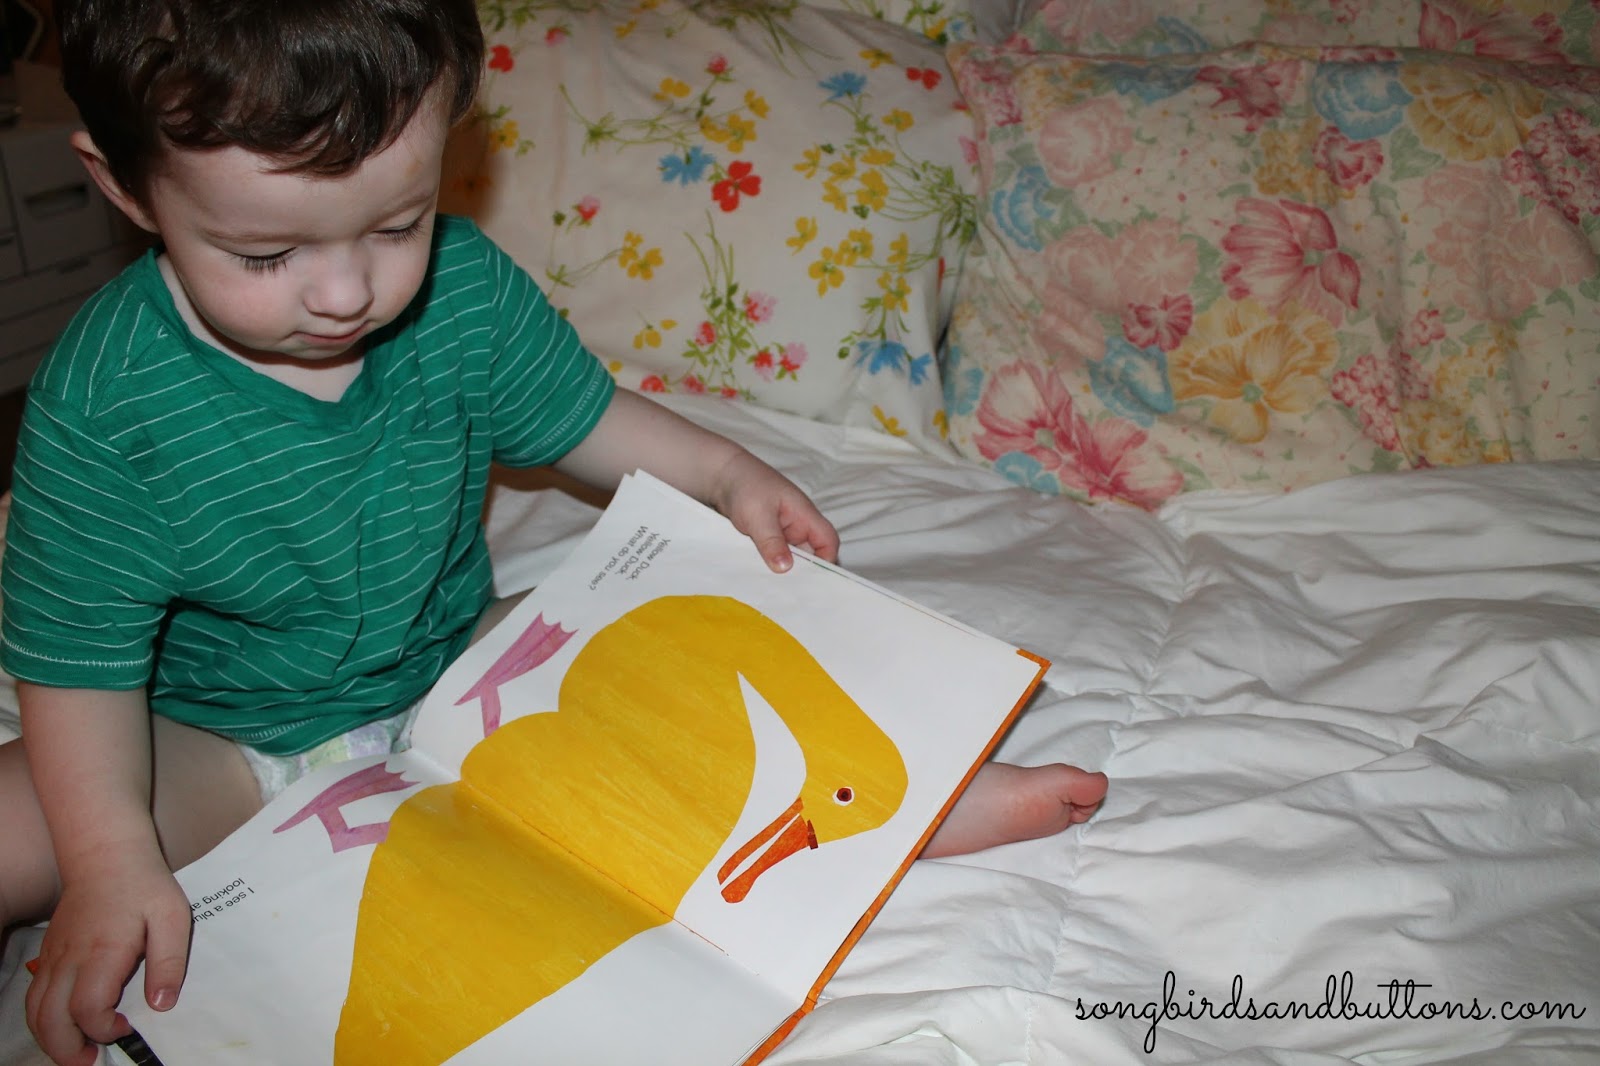 Huggies Slip-On Diapers – Perfect for Little Squirmers